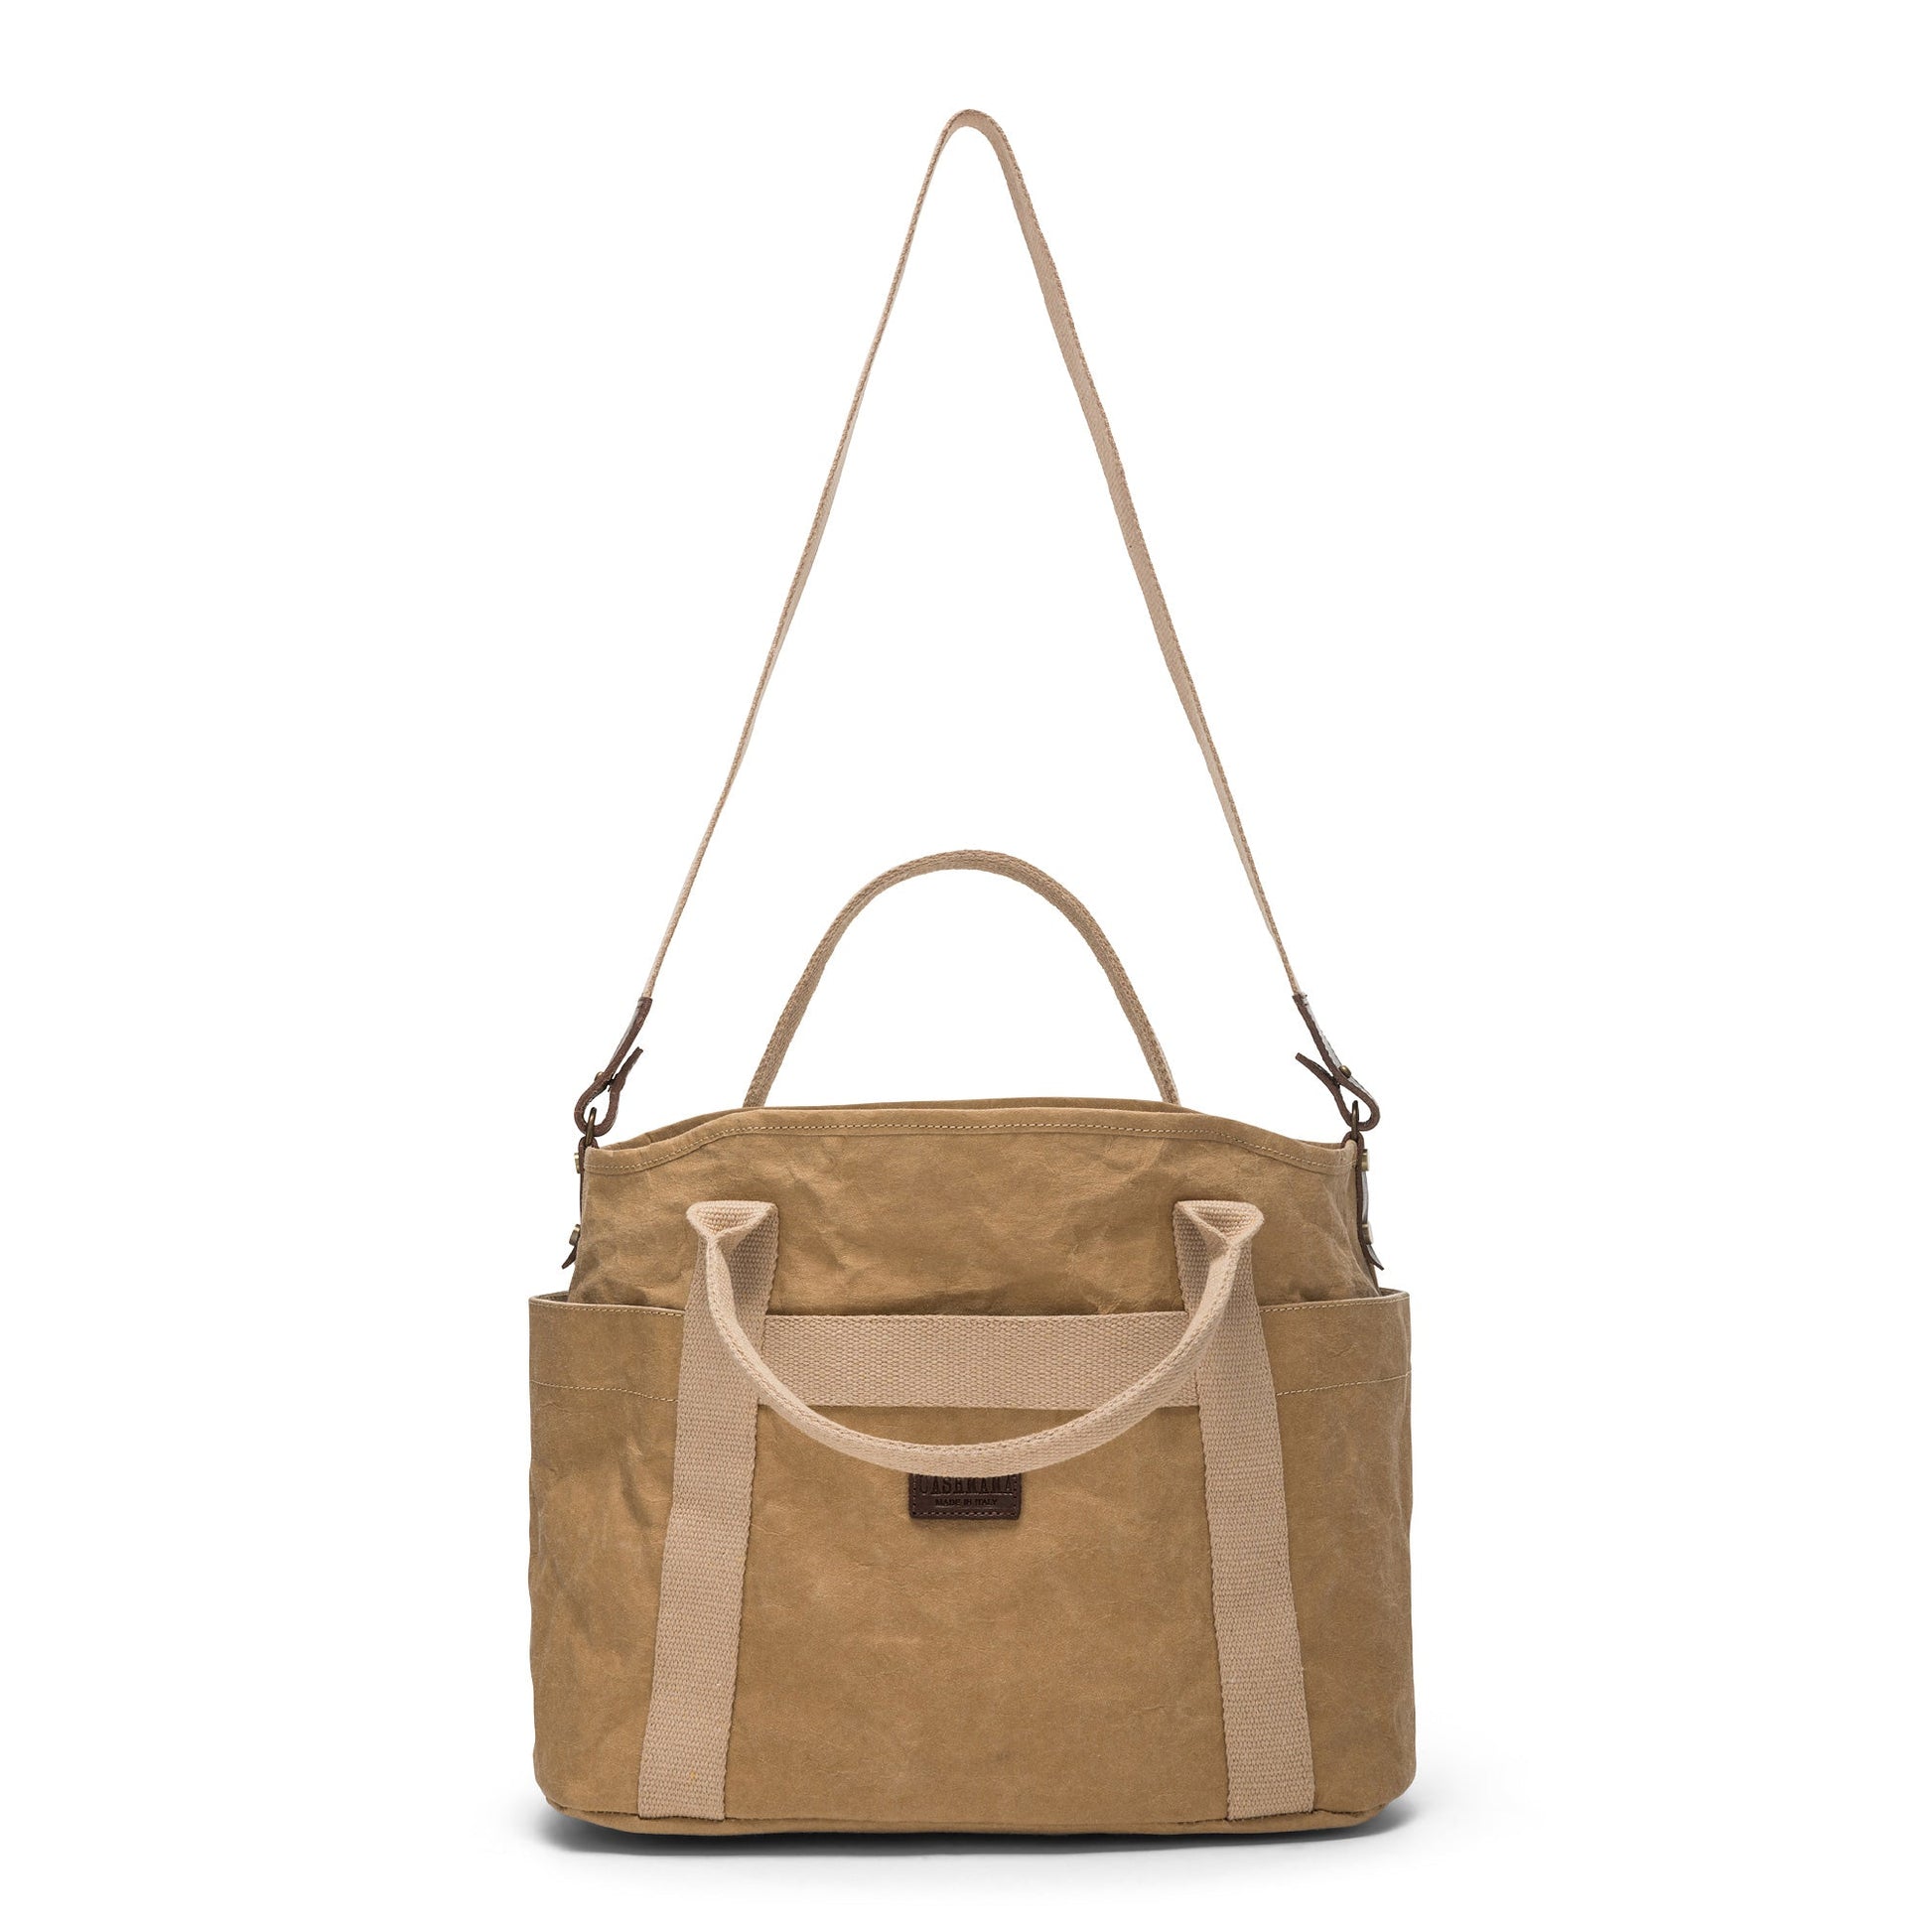 A large washable paper shopper bag is shown from a front angle. It features a long canvas shoulder strap and two top handles. It has an external pocket running the length of the bag, and the UASHMAMA logo stamped in the front. It is shown in a natural pale tan colour.